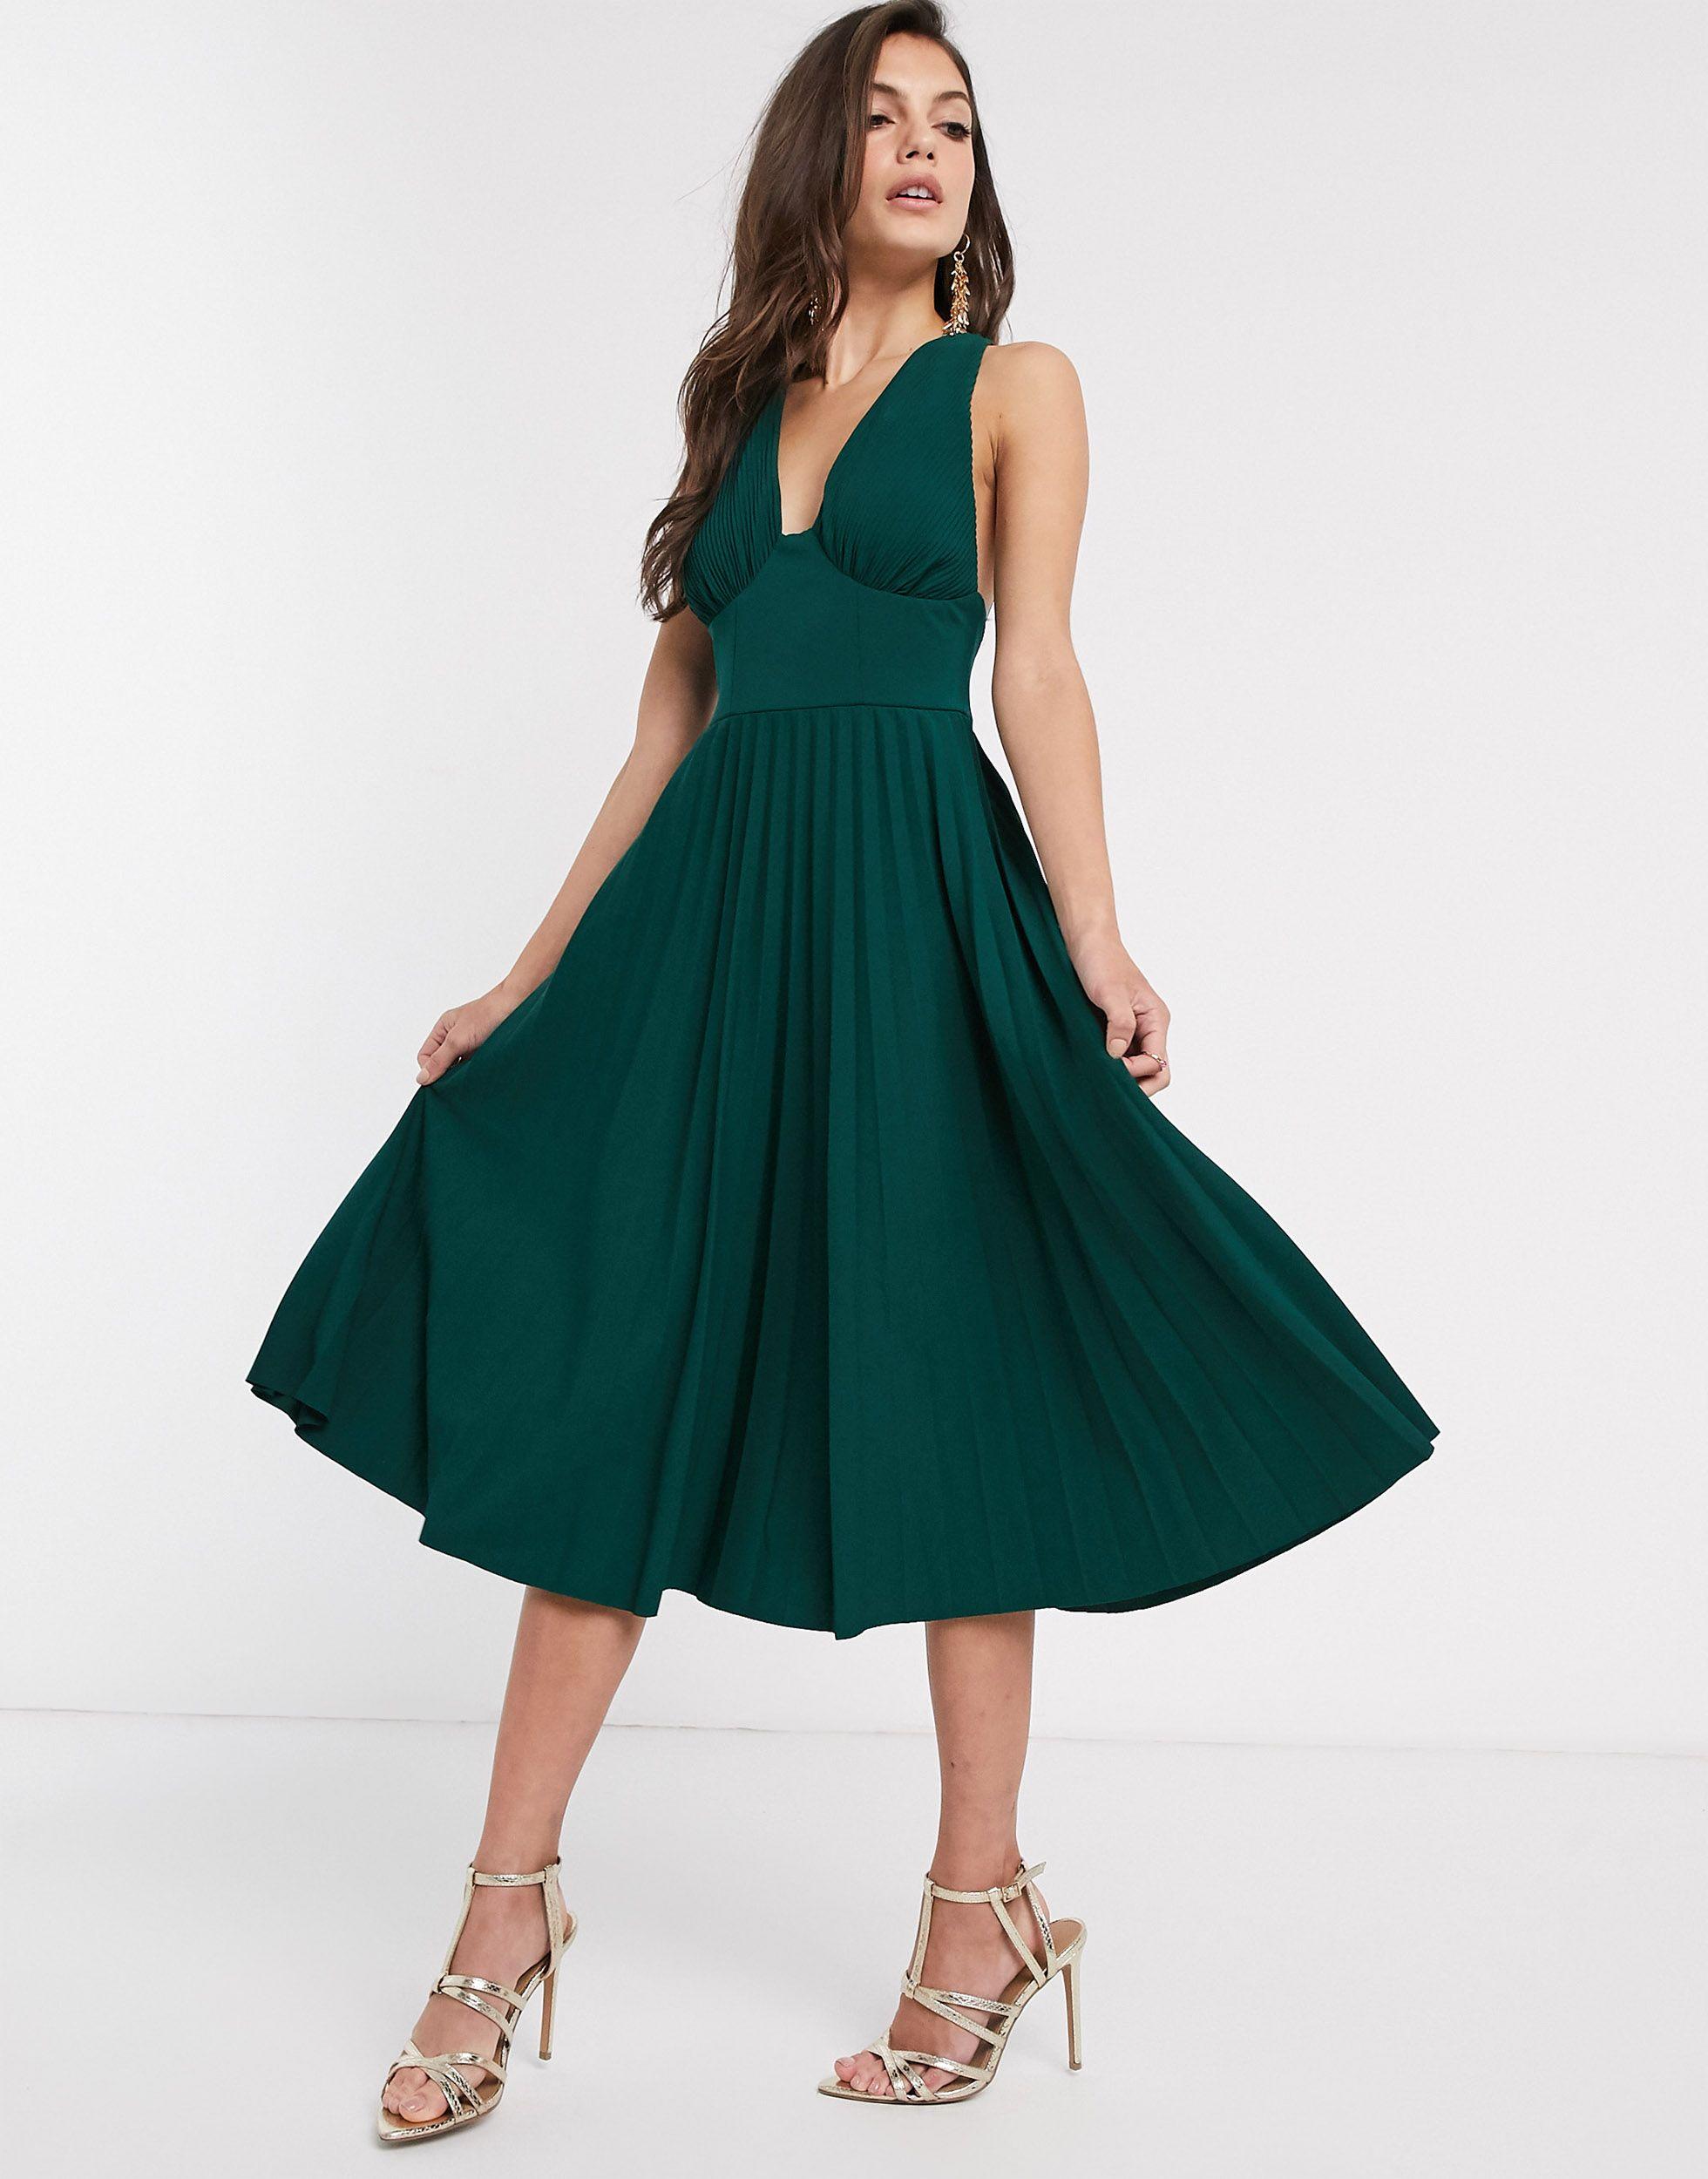 ASOS Design Corset Bandeau Midi Dress in Washed Fabric with Drape Detail Skirt in khaki-Green